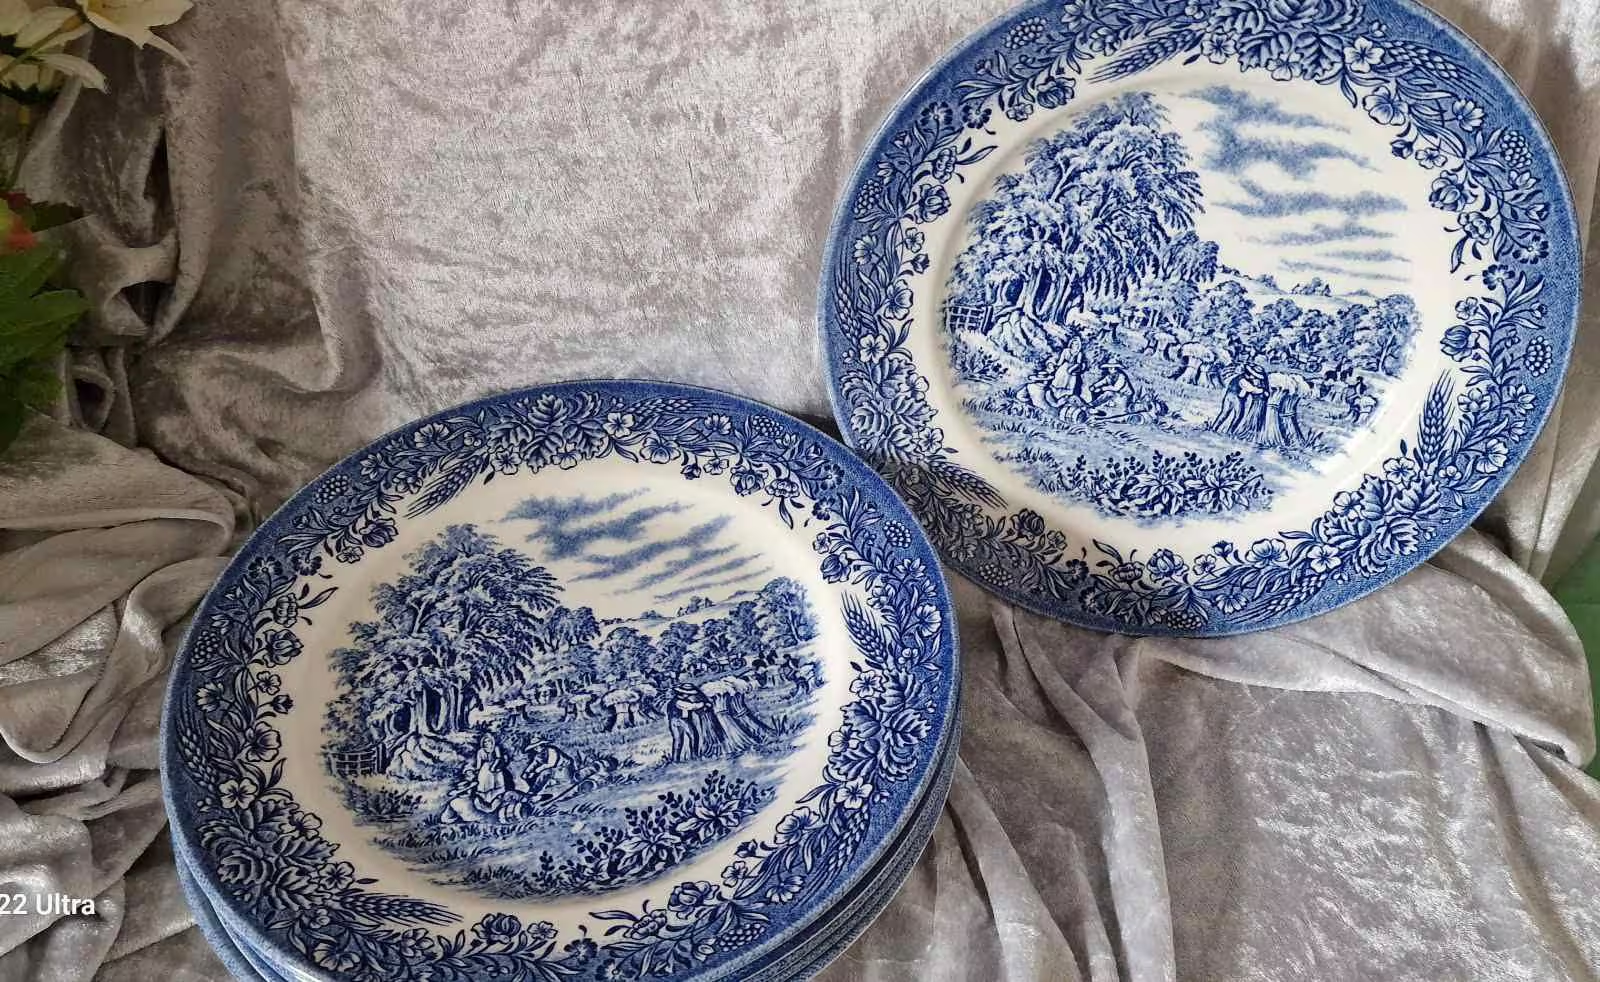 Blue and white Churchill china plate featuring a farm scene with Harvest theme.